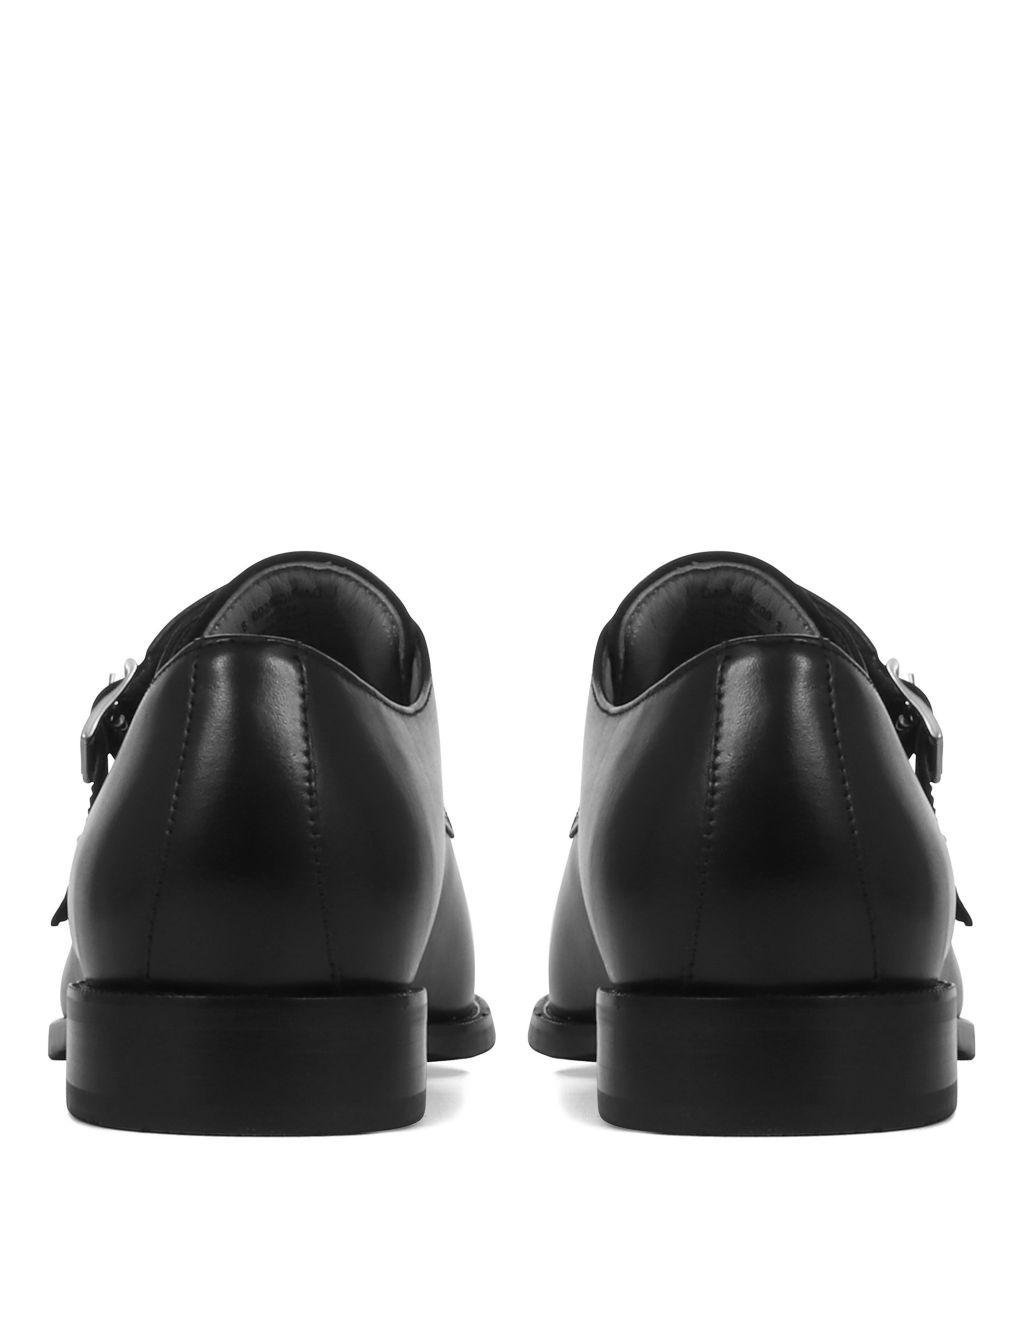 Leather Double Monk Strap Shoes image 4